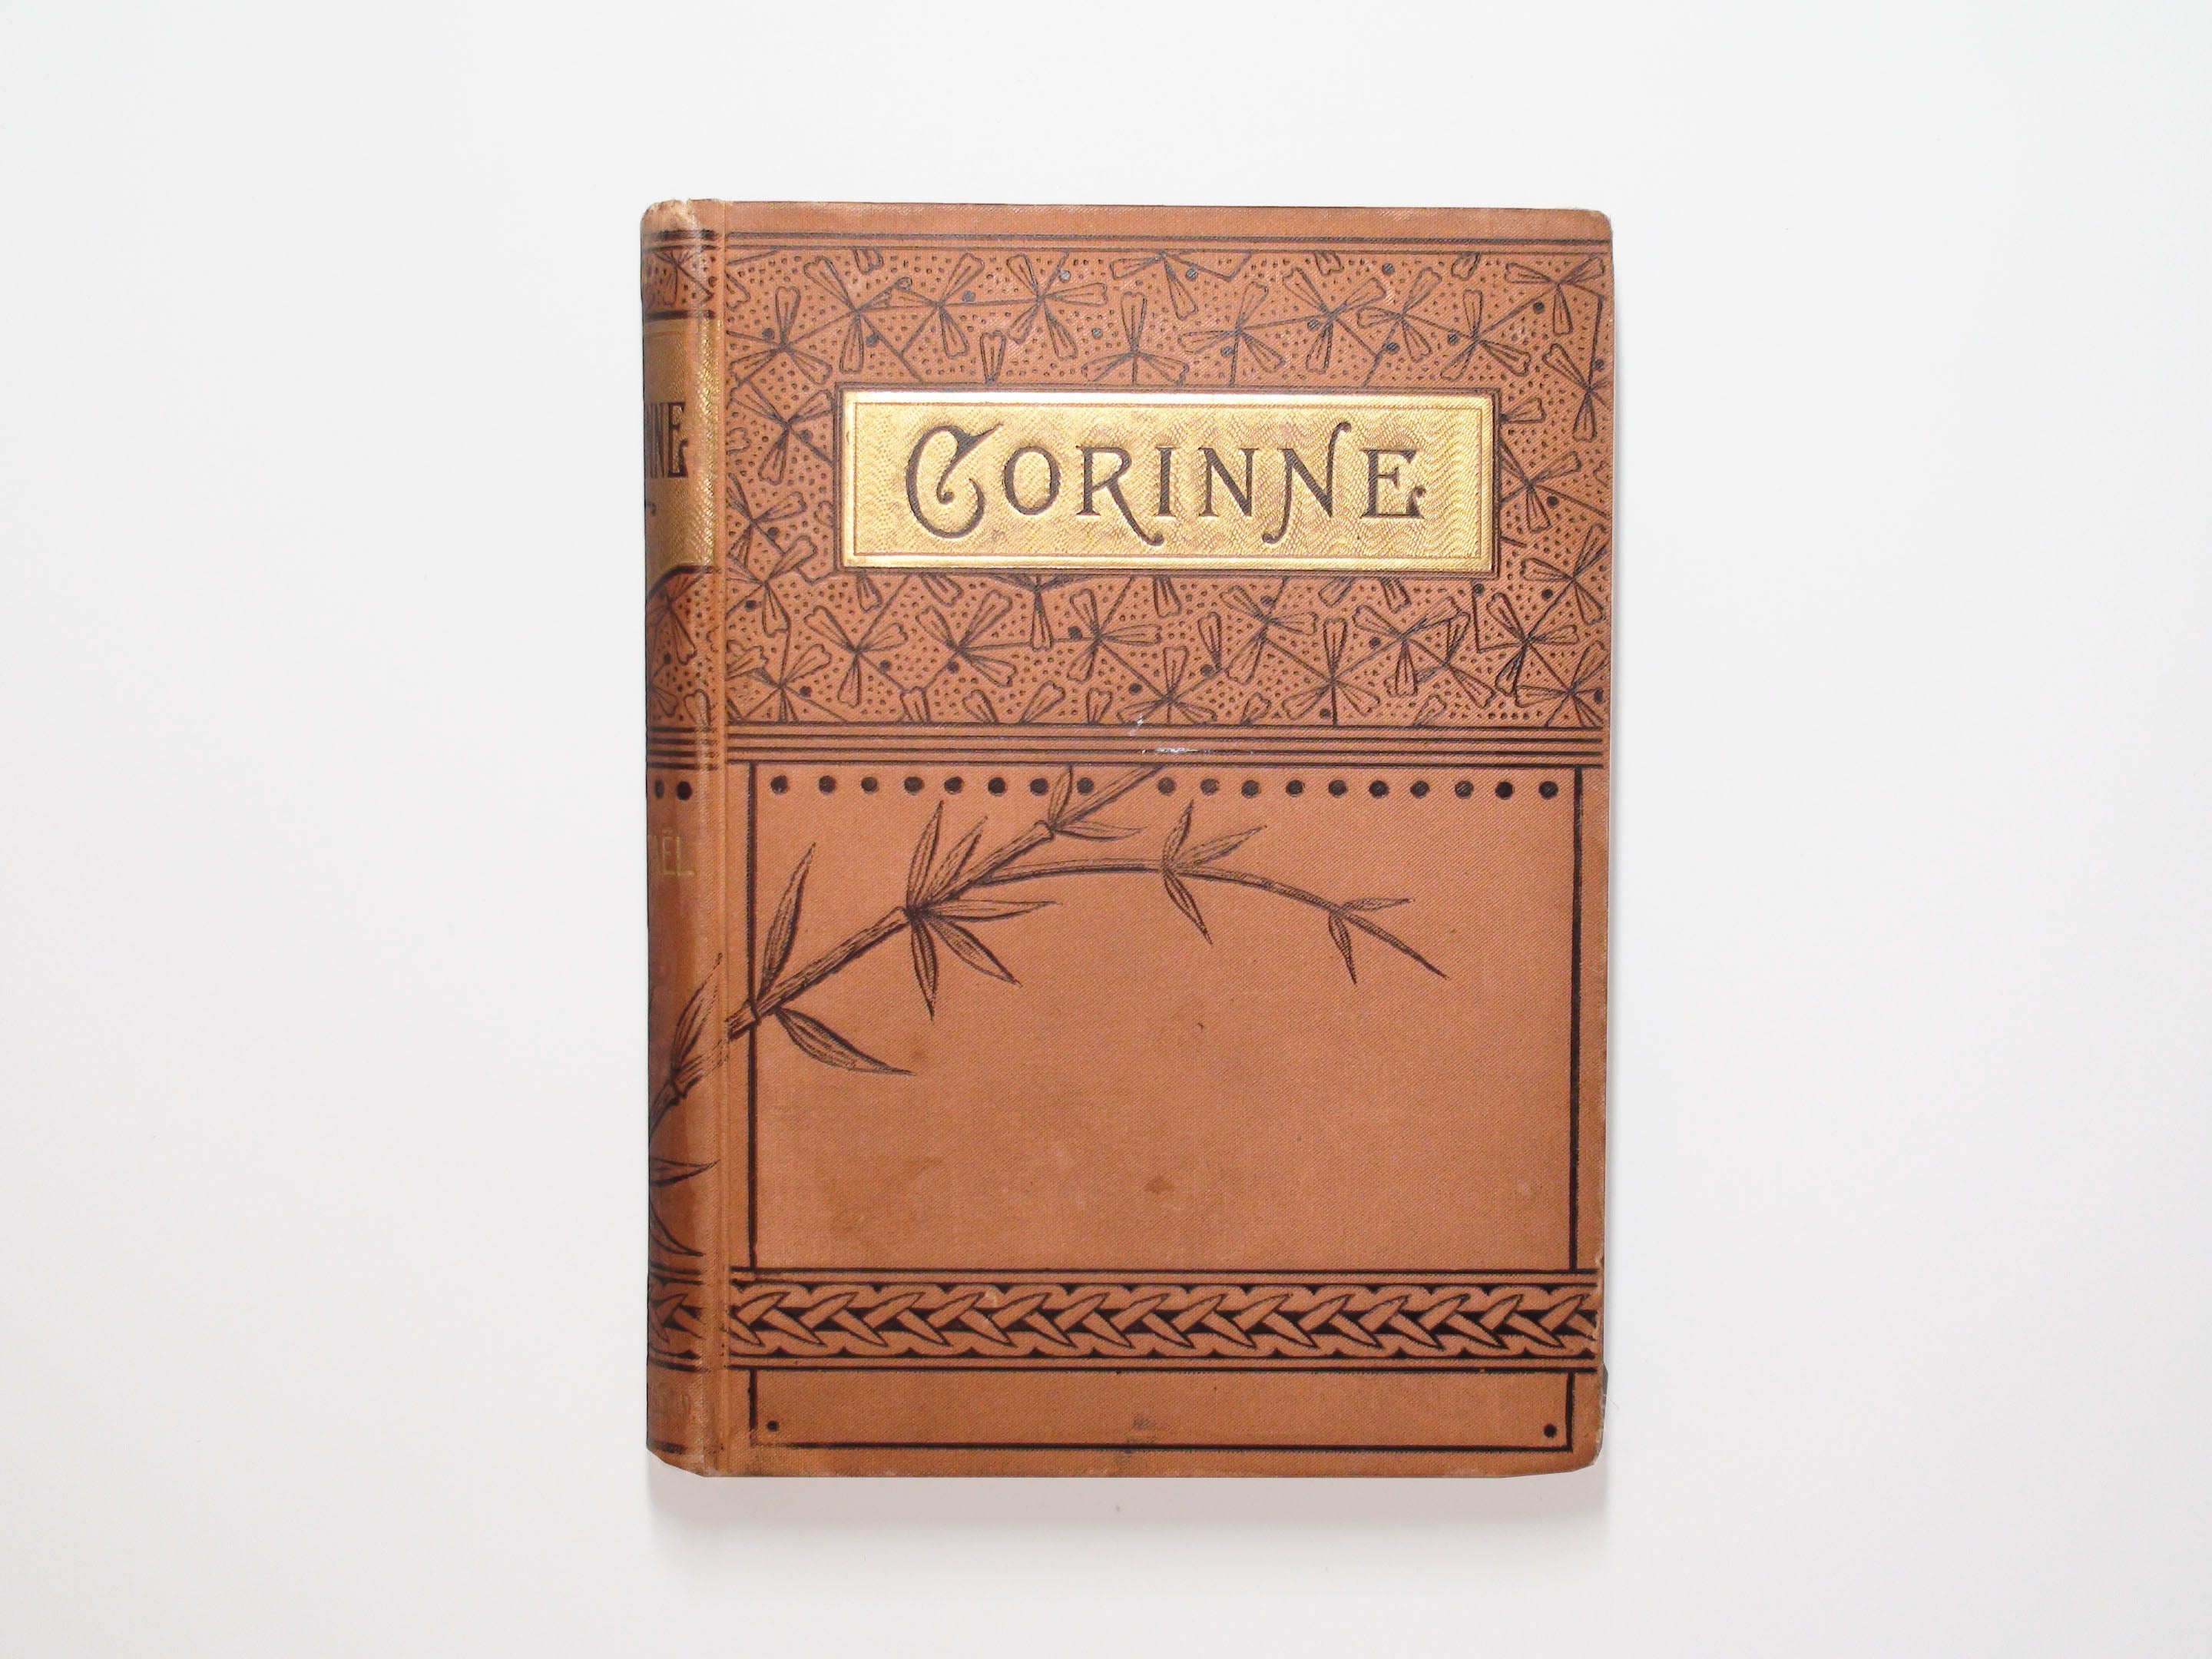 Corinne, Or Italy, by Madame De Stael, Victorian Binding, Romance, 1882